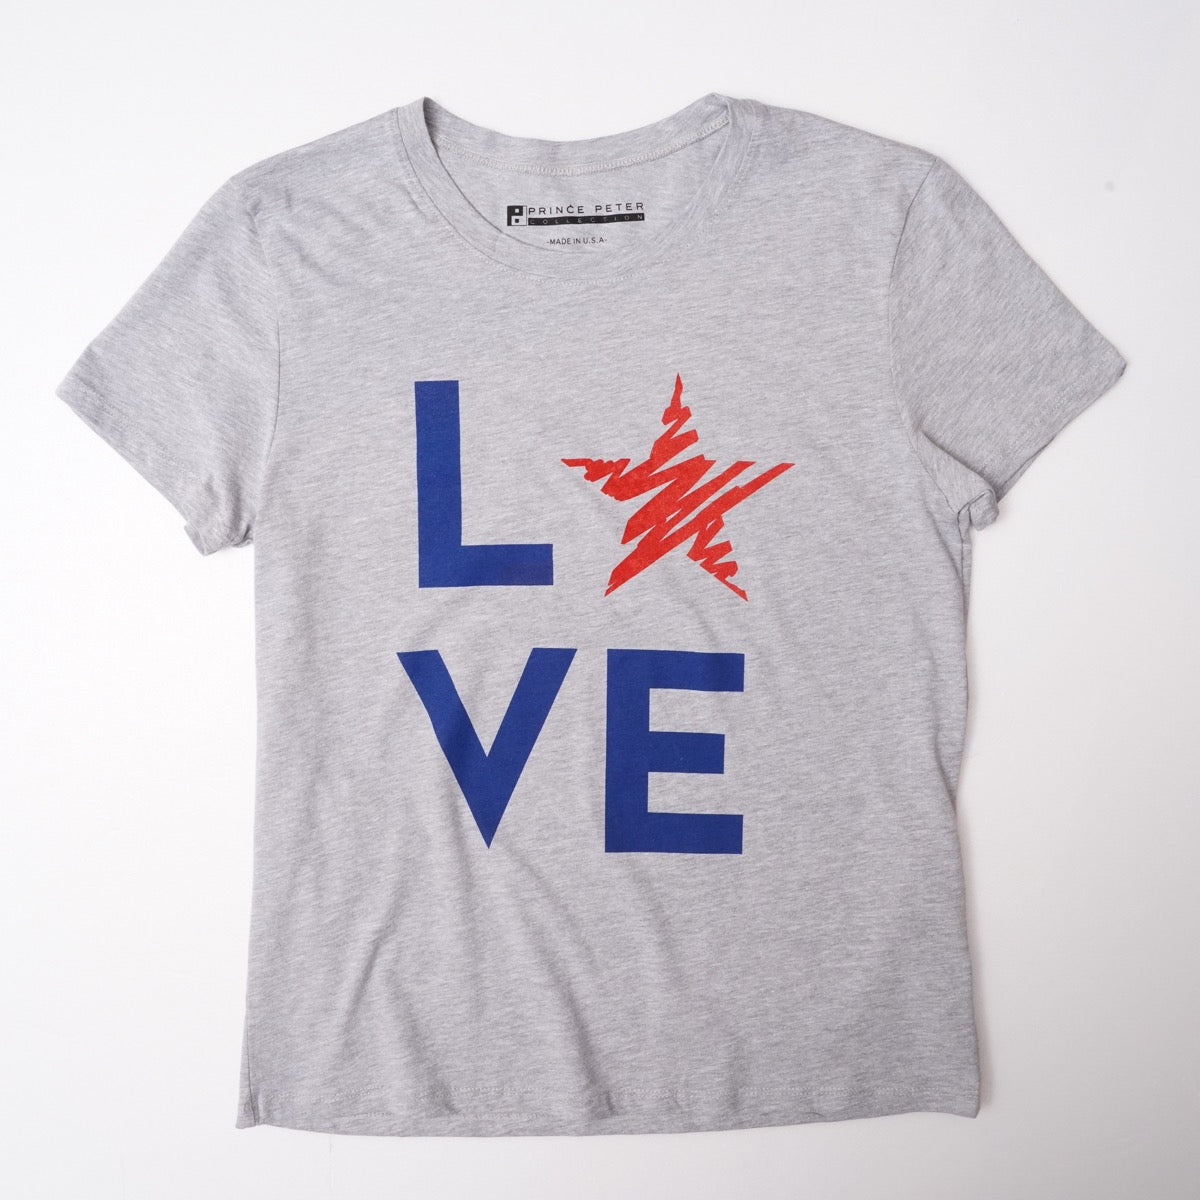 【WOMEN】PRINCE PETER COLLECTION L☆VE Tee